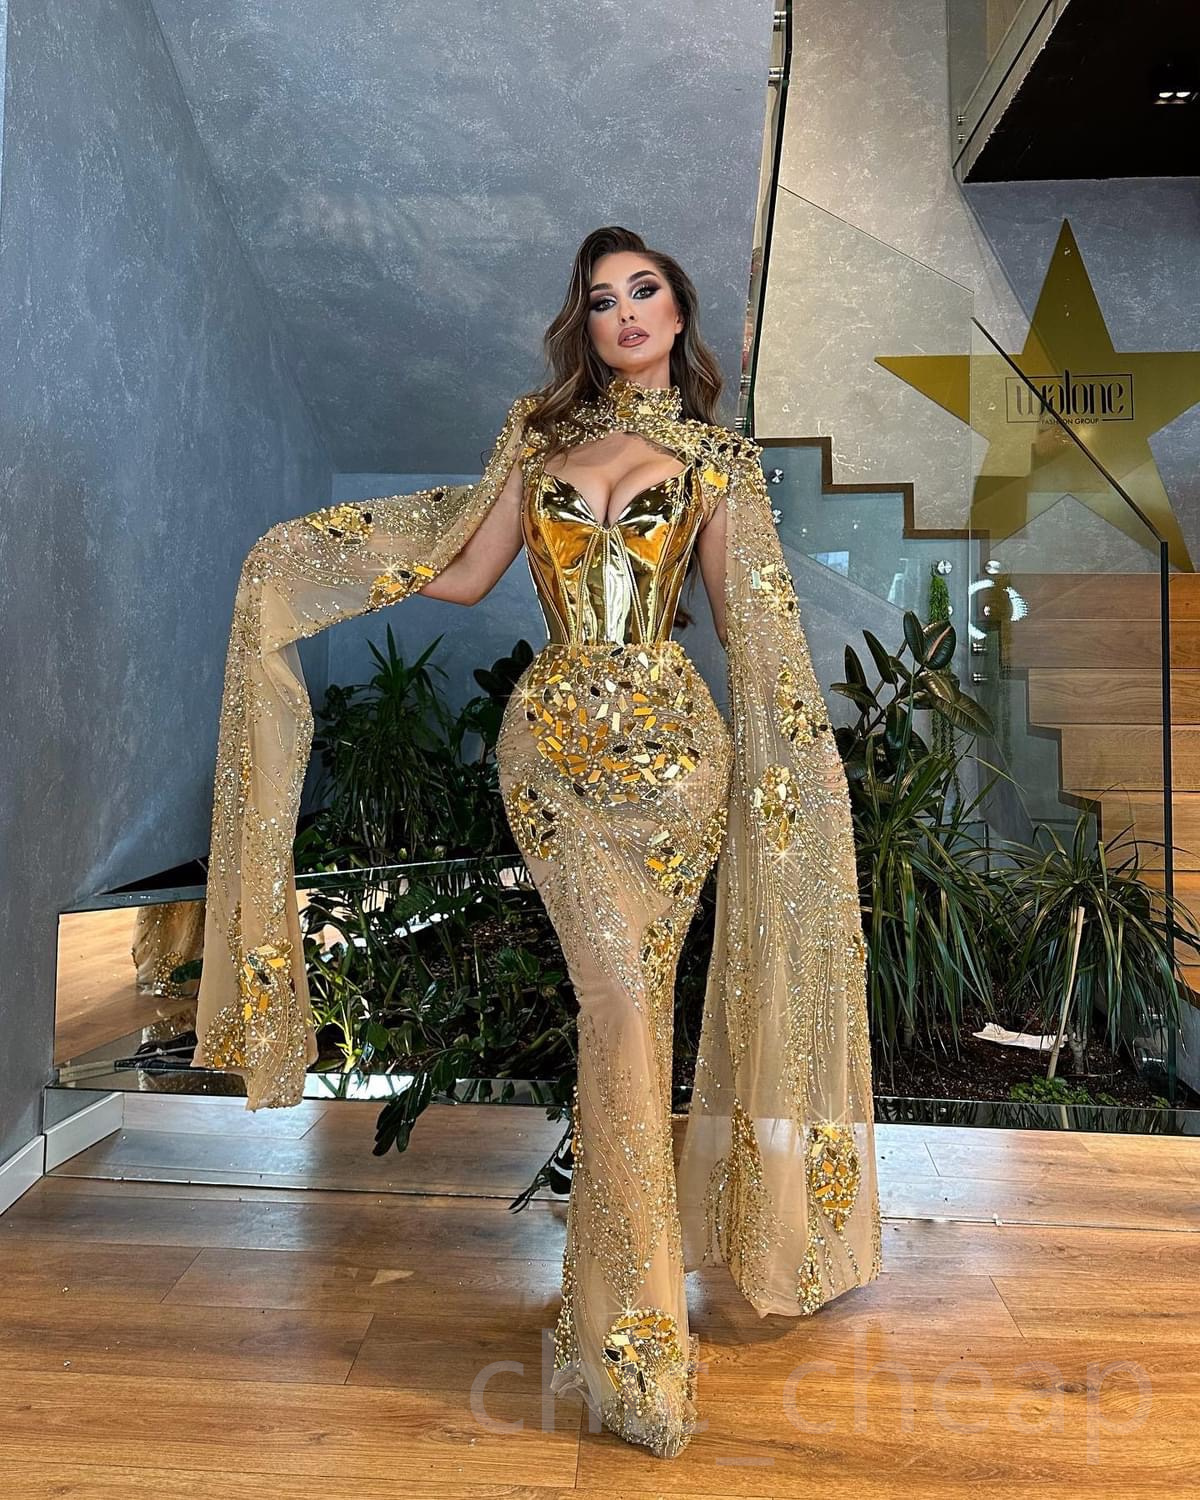 2023 May Aso Ebi Gold Mermaid Prom Dress Crystals Beaded Luxurious Evening Formal Party Second Reception Birthday Engagement Gowns Dress Robe De Soiree ZJ271